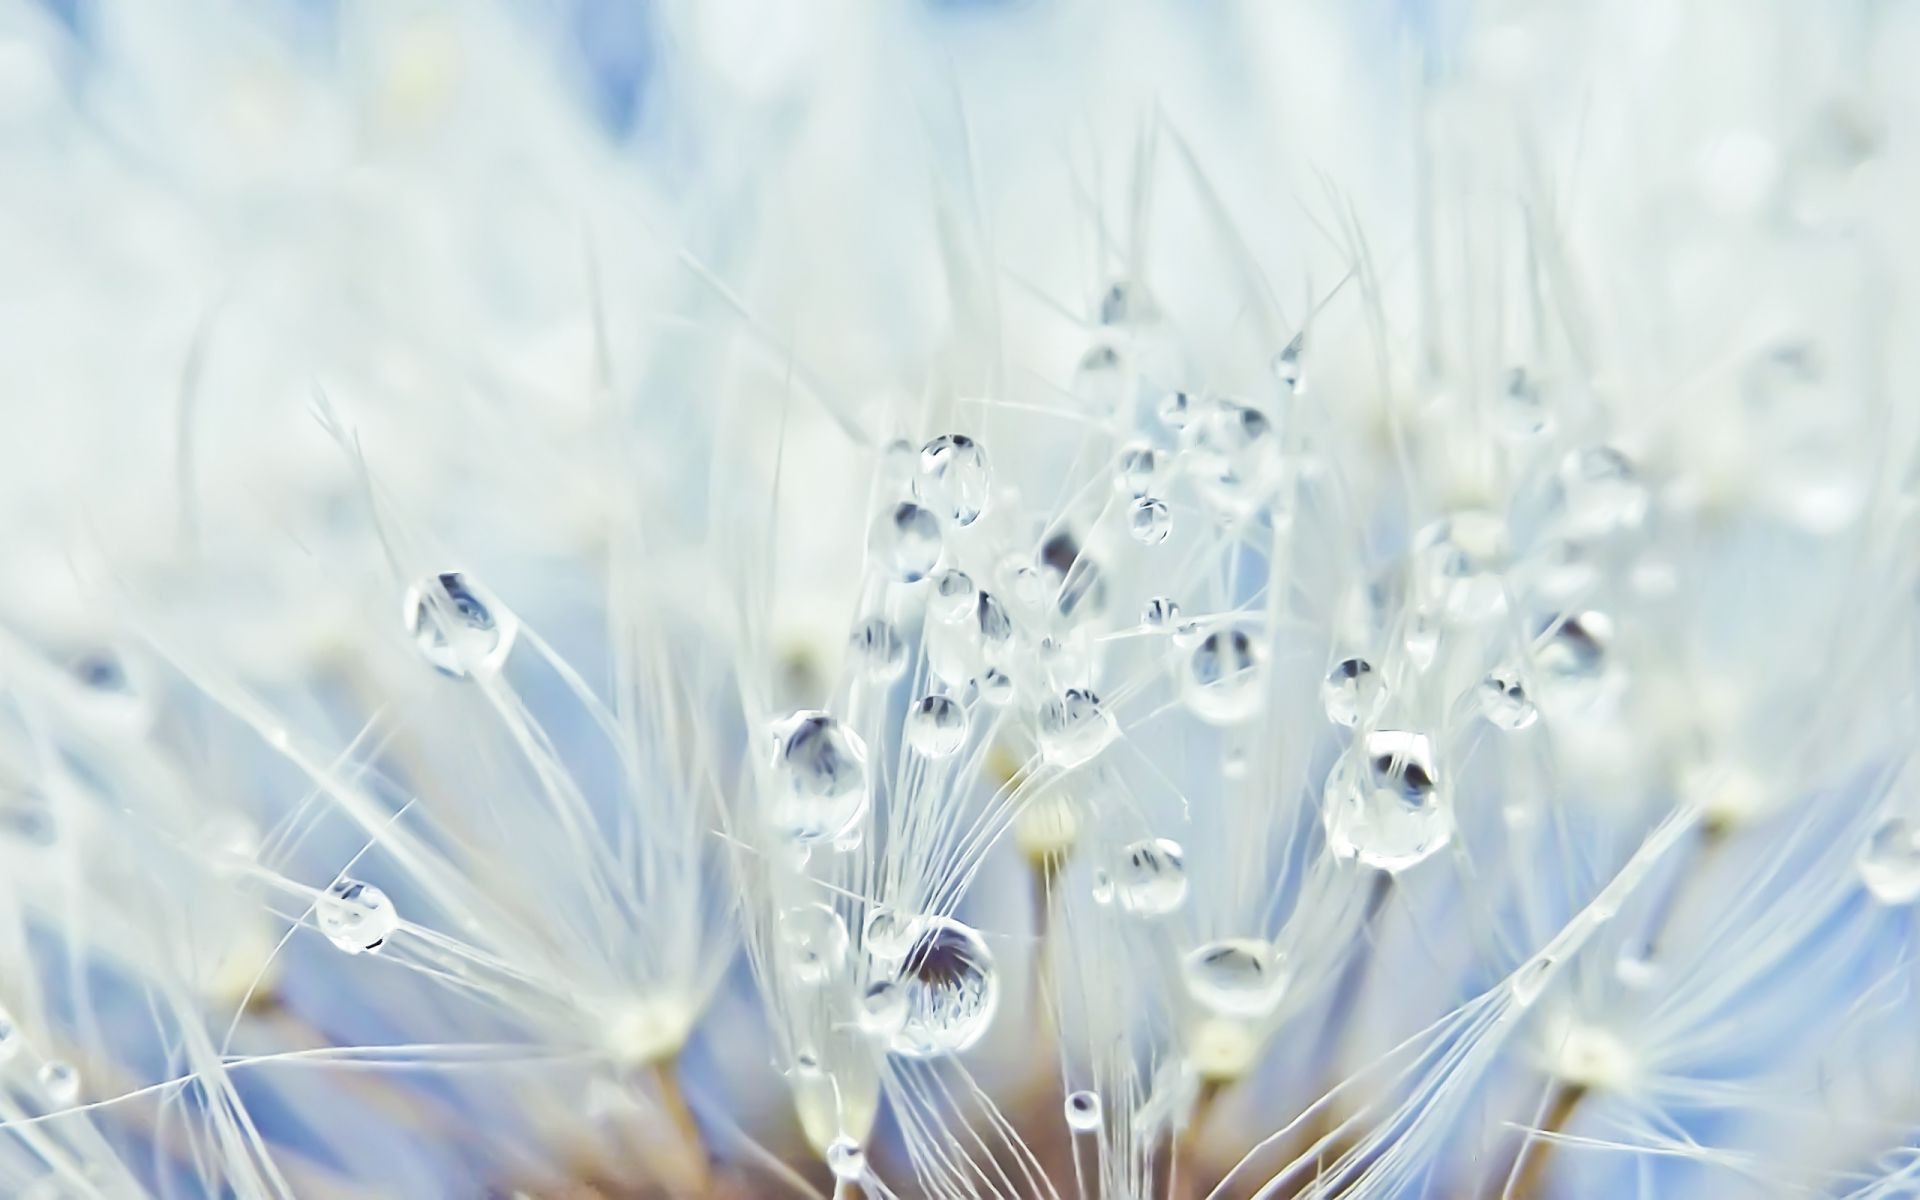 droplets and water dandelion bright flora nature close-up desktop abstract light color flower summer beautiful seed celebration fragility season freshness blur